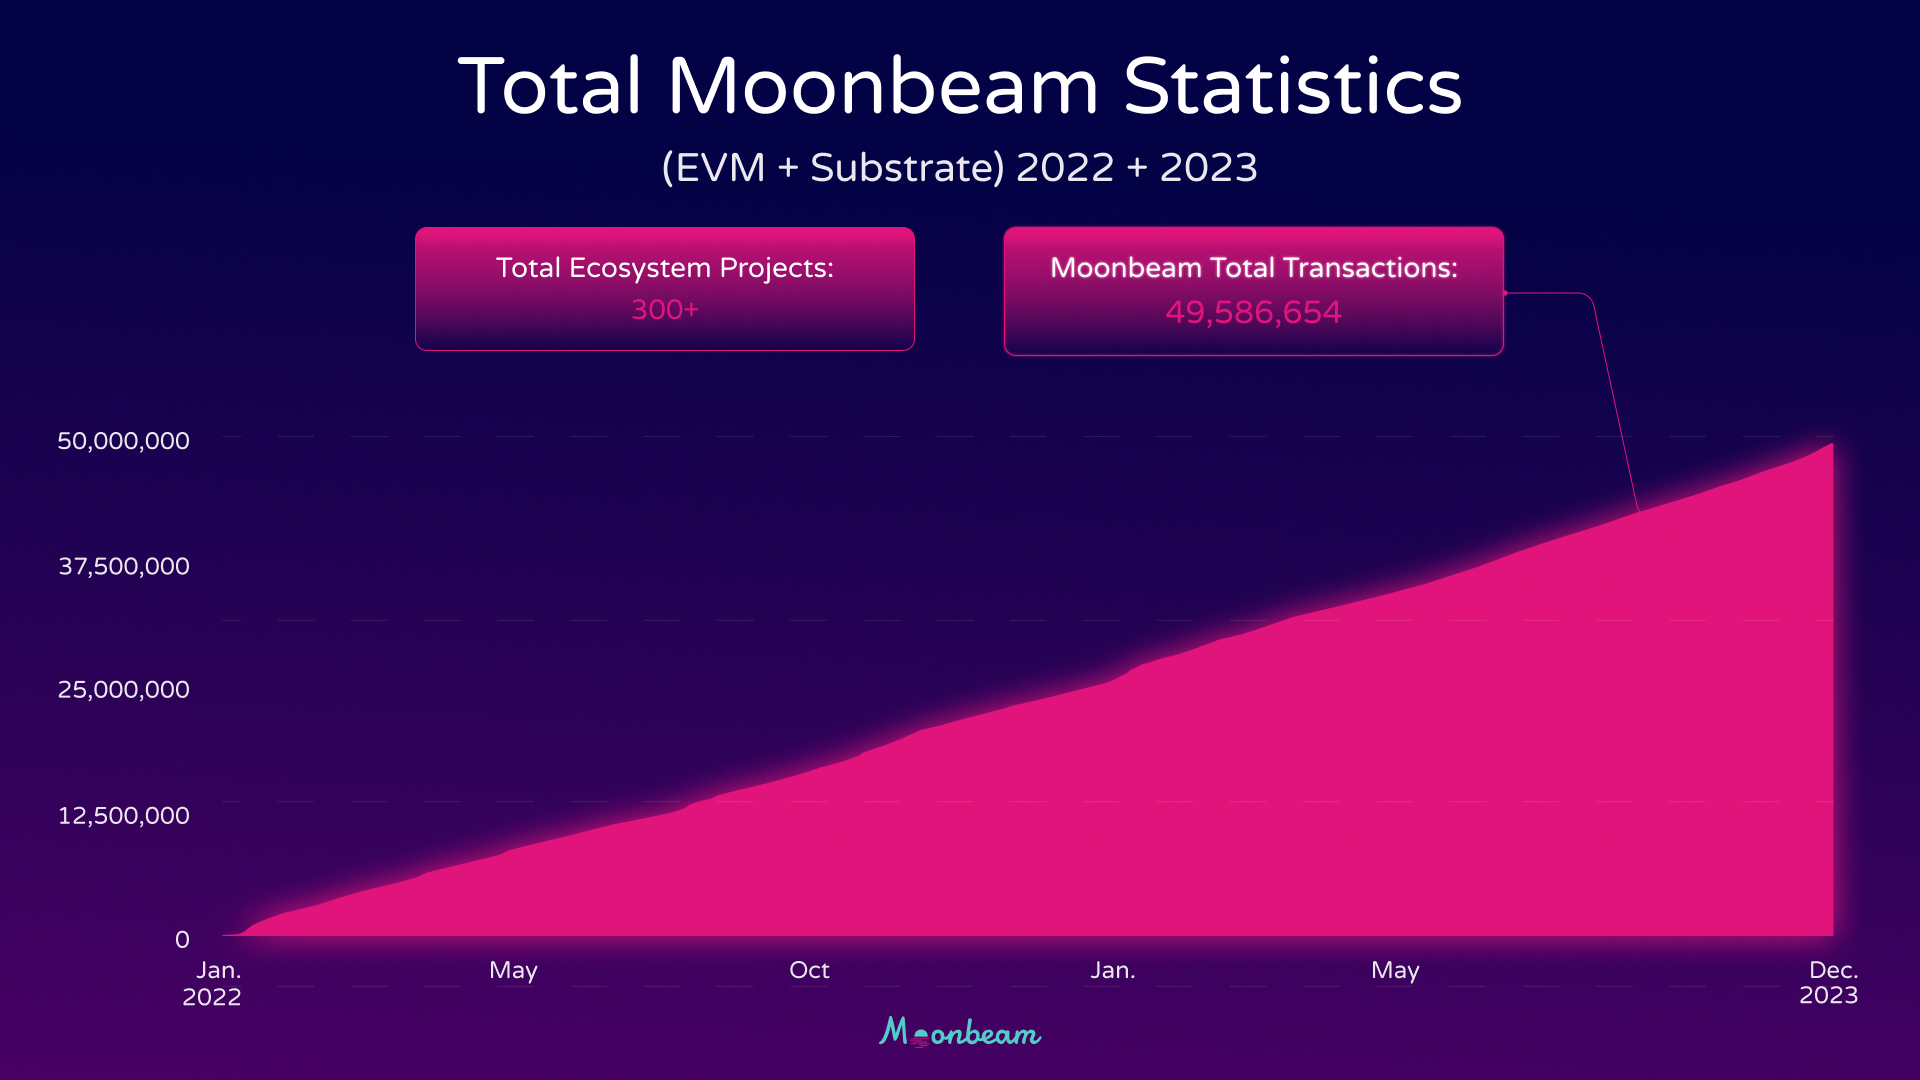 Graph showing the total Moonbeam statistics, combining EVM and Substrate for 2022 and 2023.